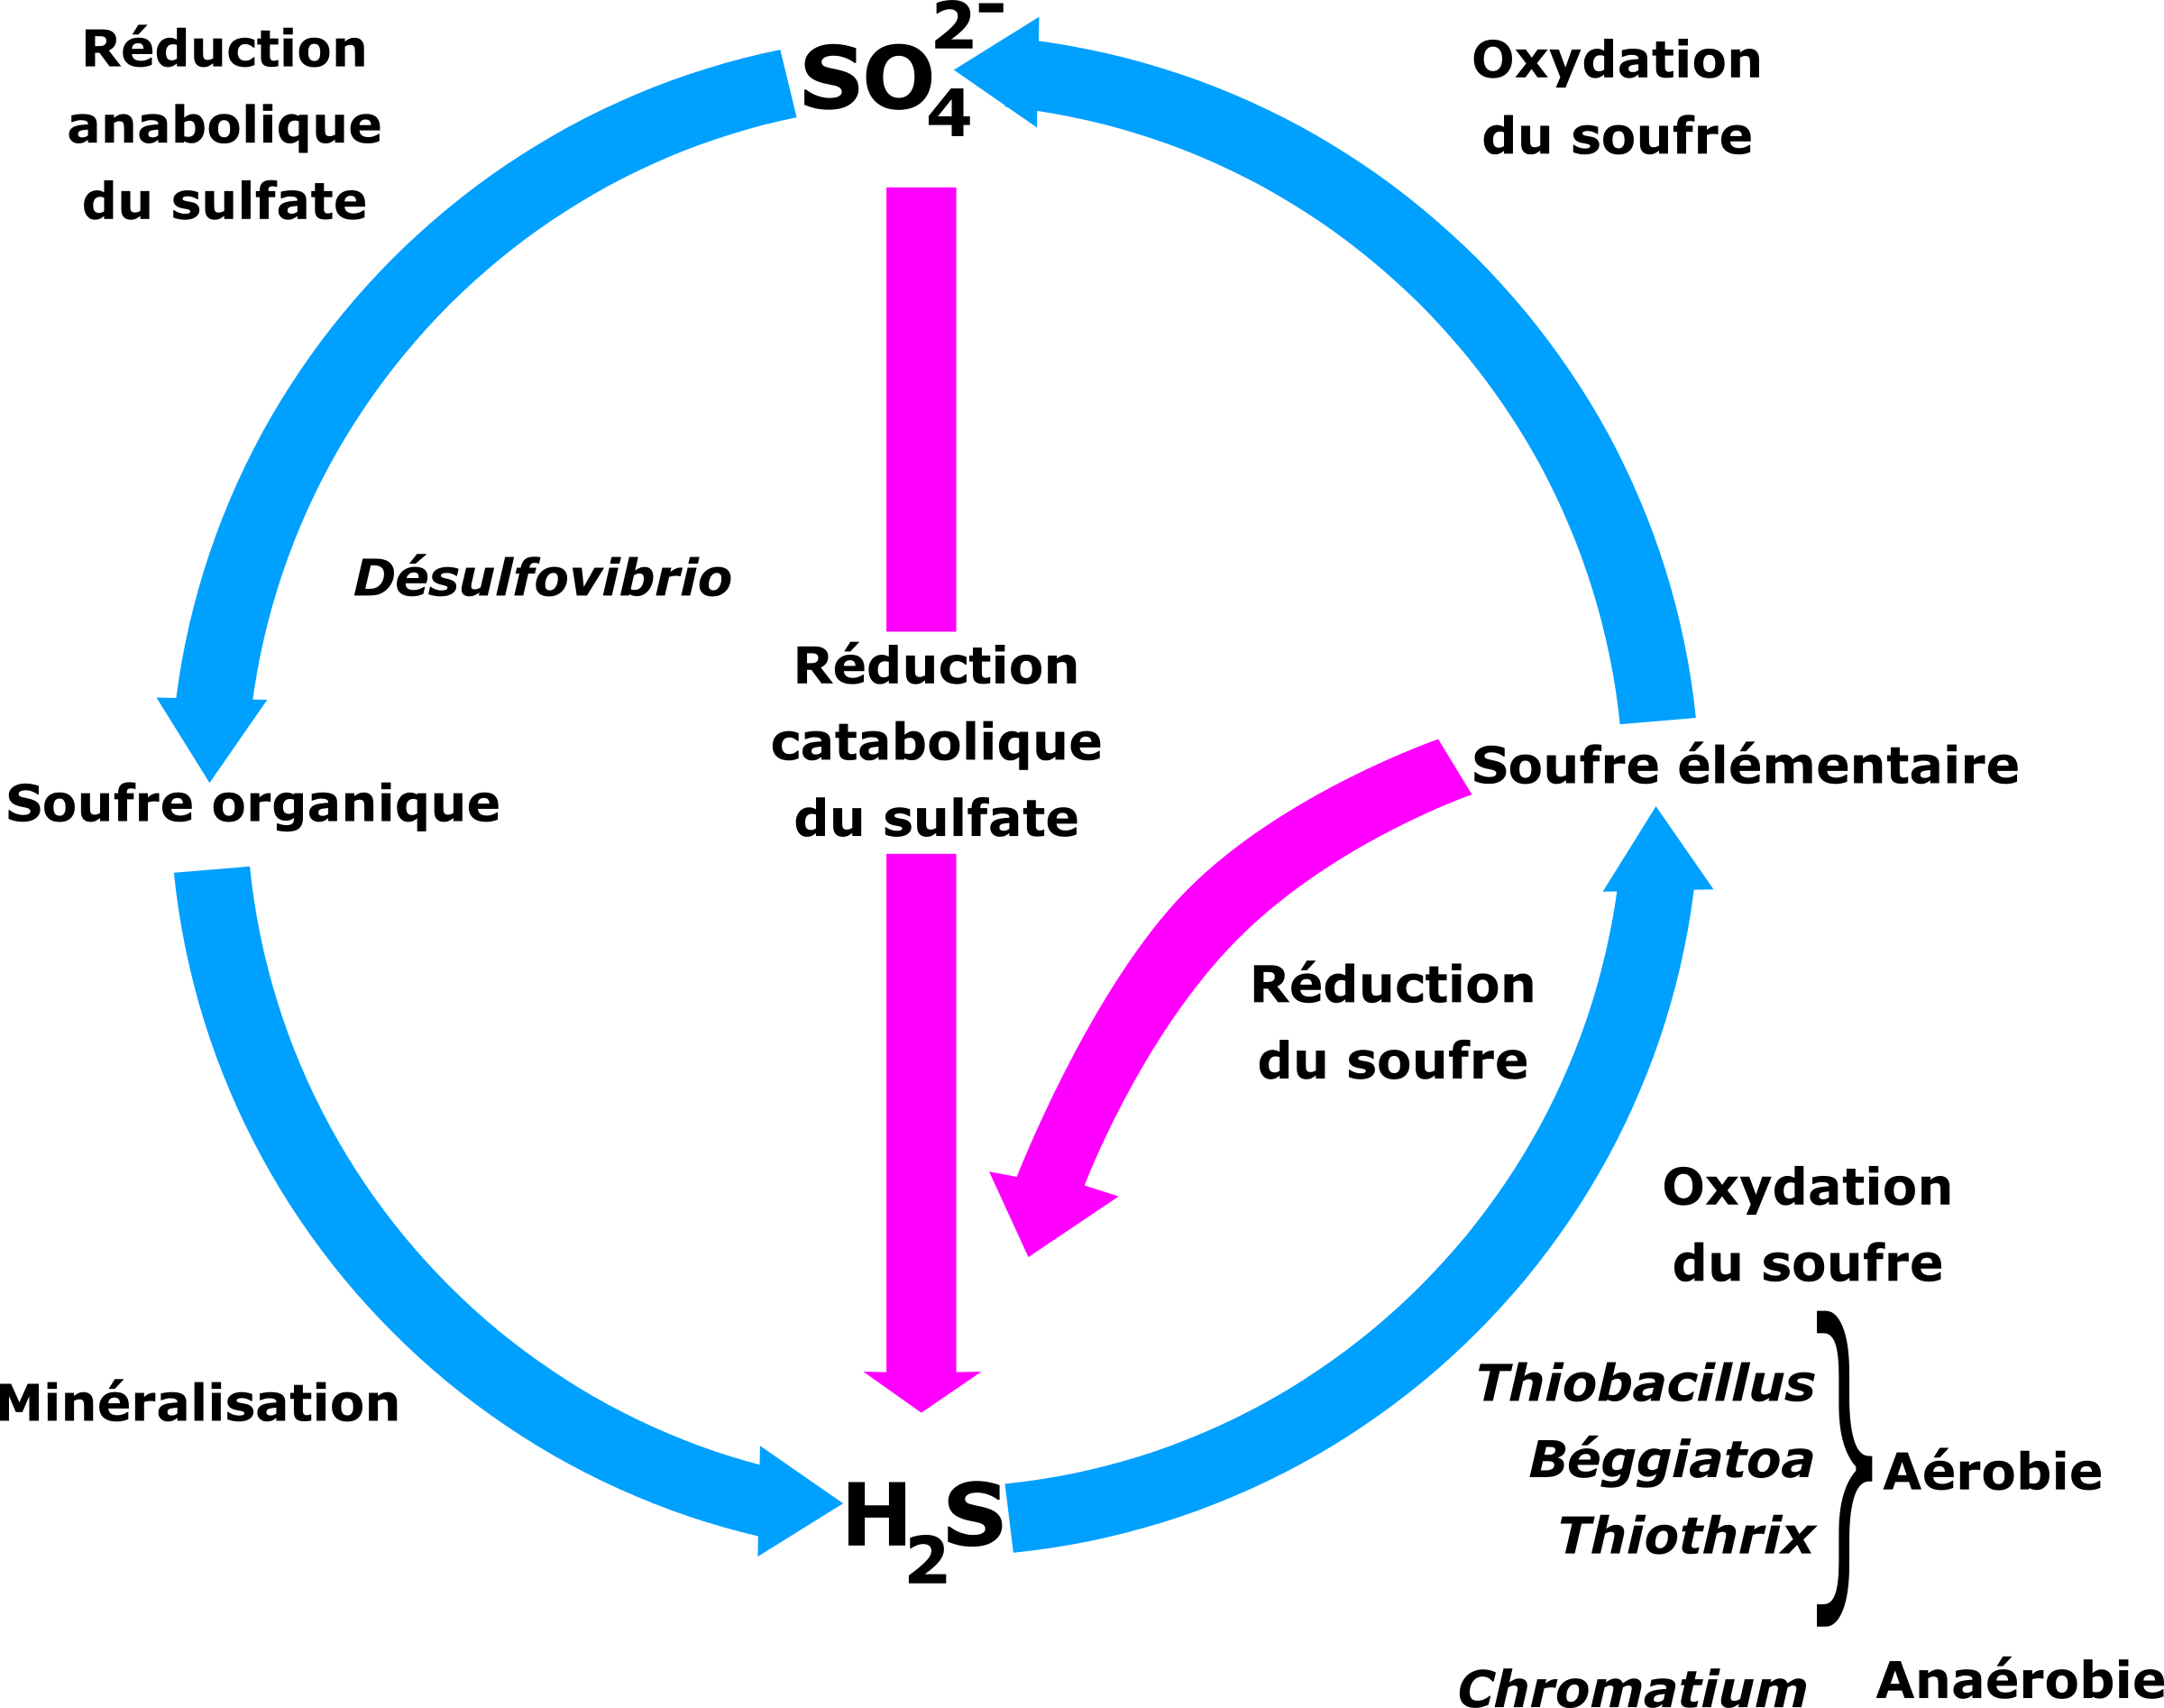 A Blue And Pink Arrows In A Circle